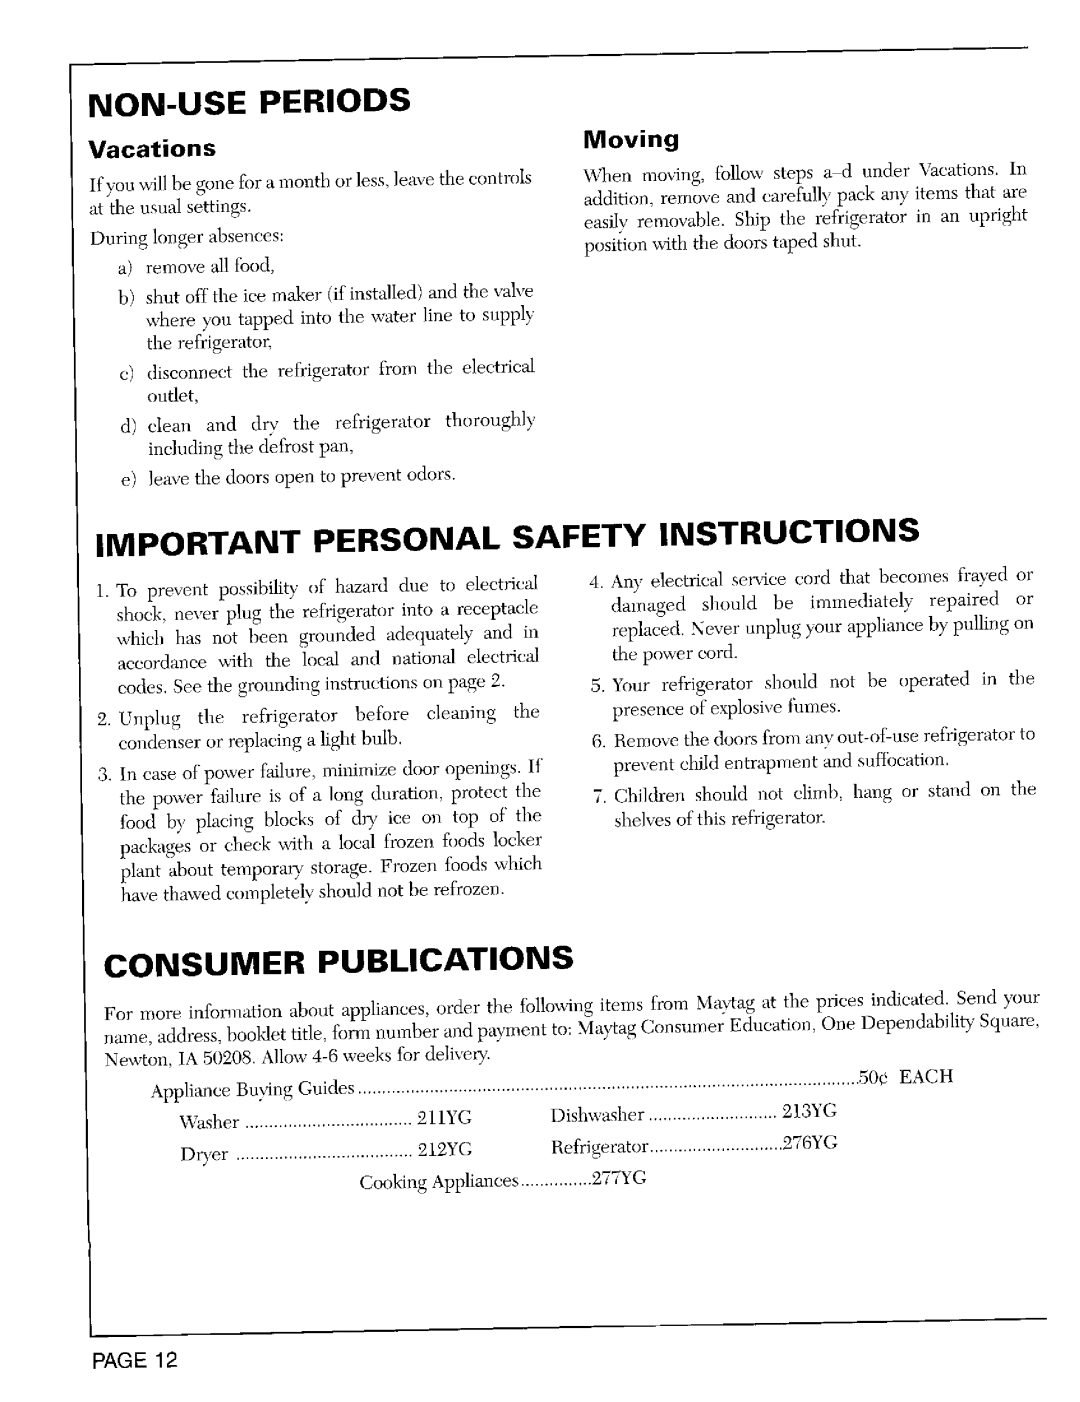 Maytag RST2400 Non-Useperiods, Important Personal Safety Instructions, Consumer Publications, Vacations, Moving, Page 